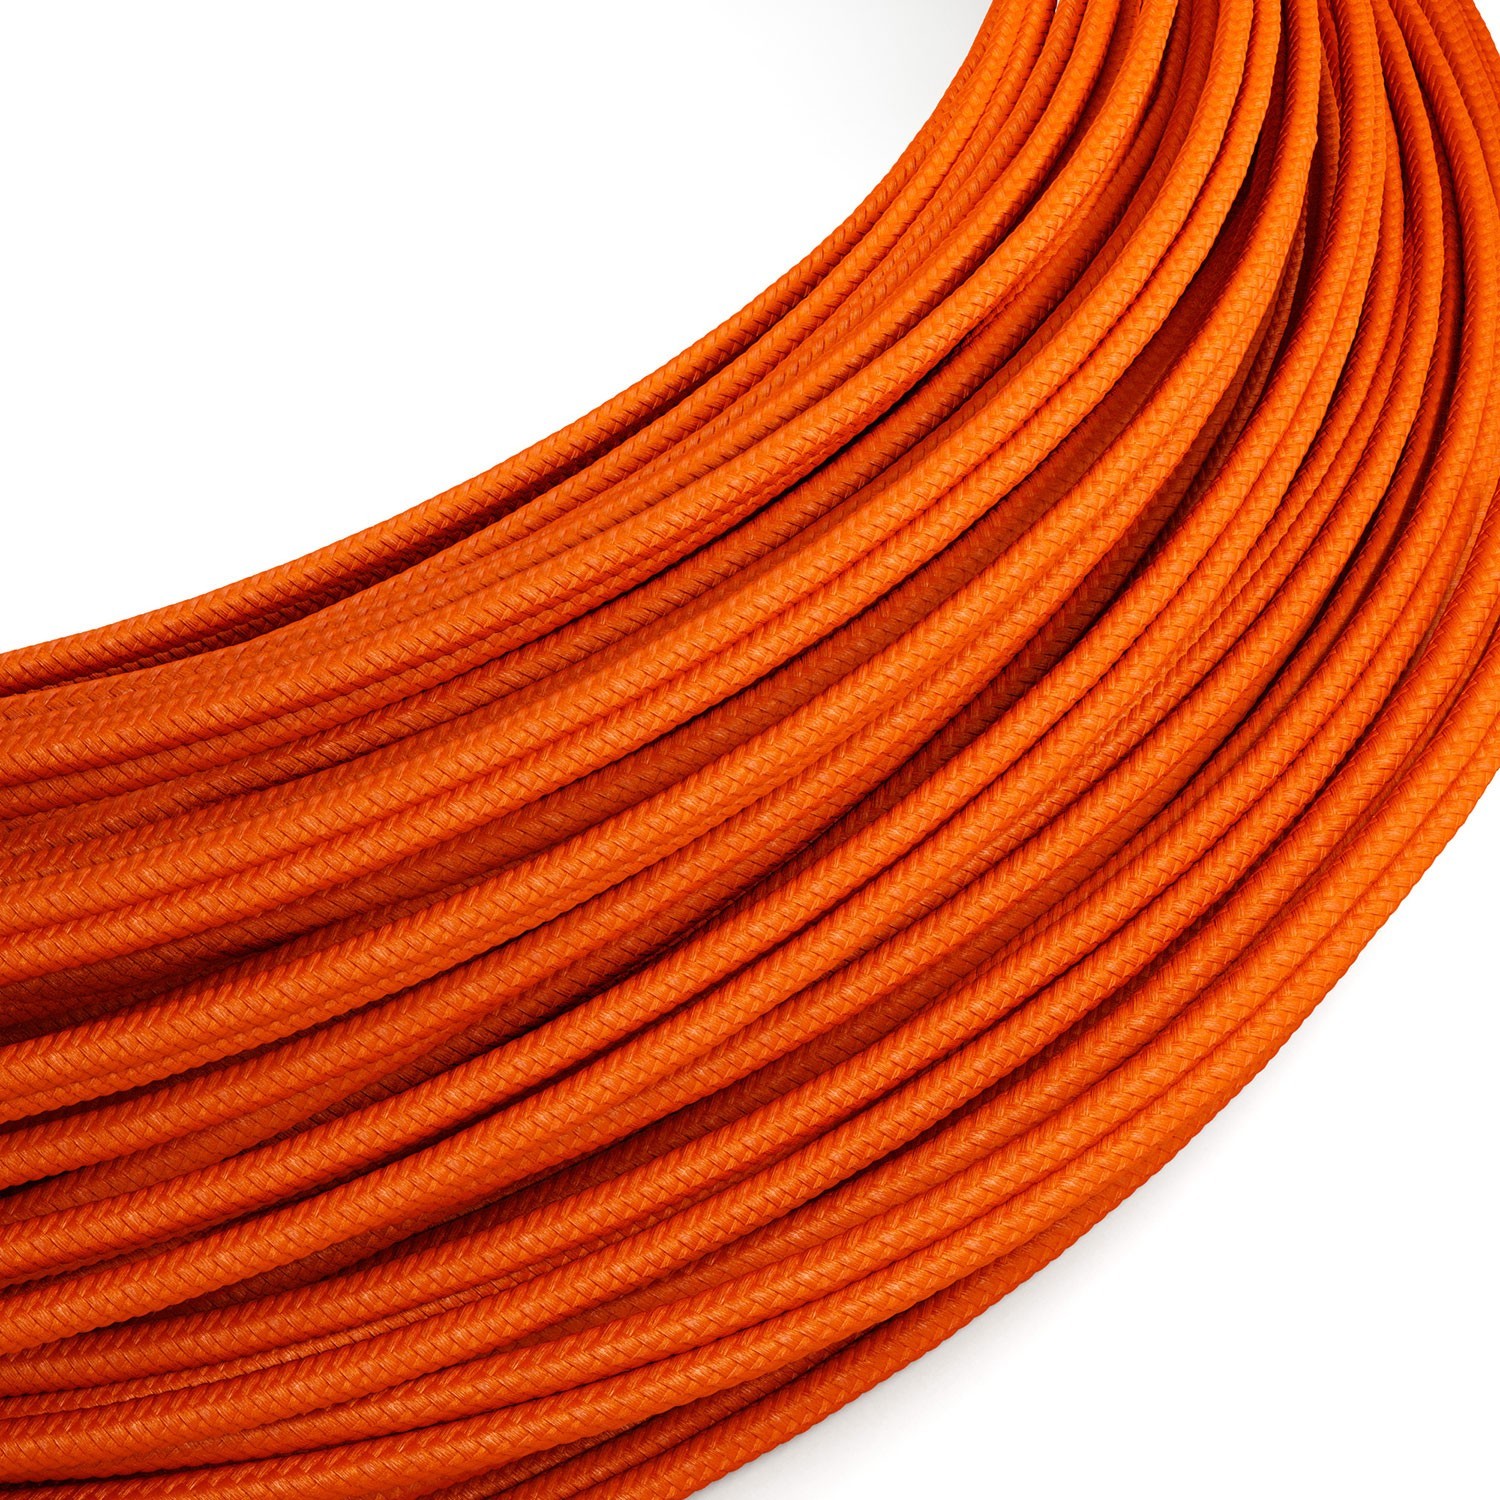 Extra Low Voltage power cable coated in silk effect fabric Orange RM15 - 50 m